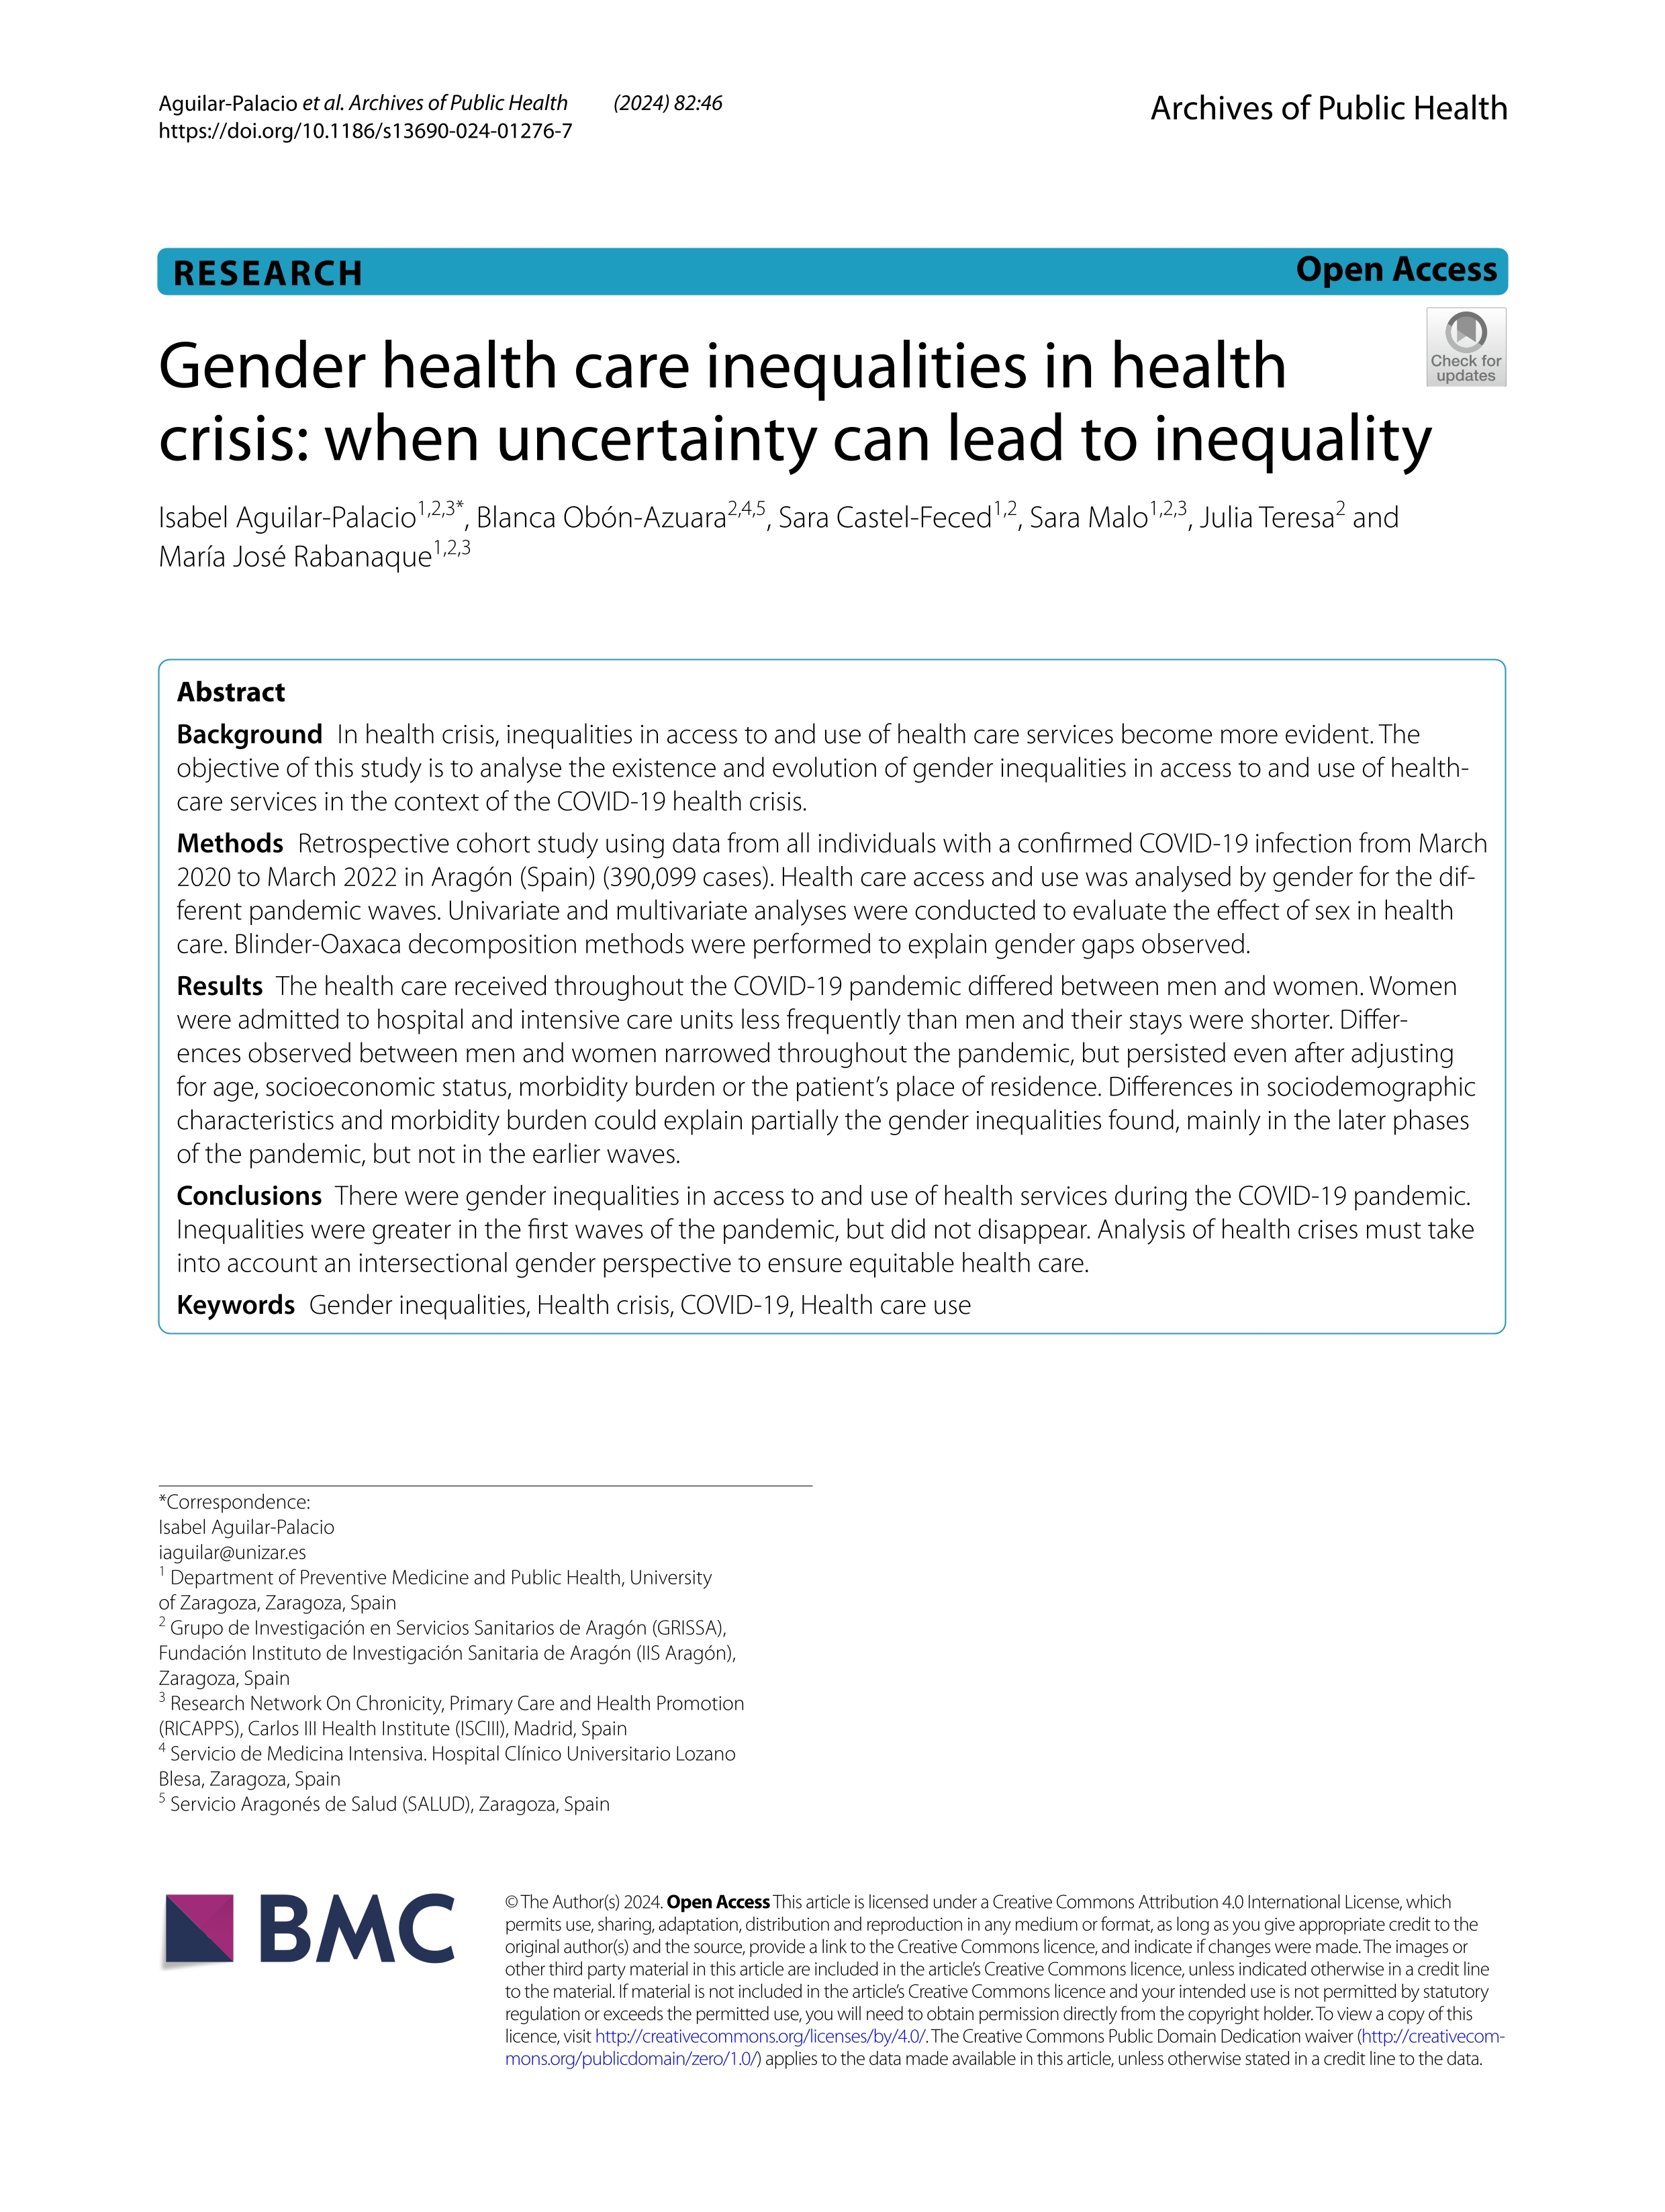 Gender health care inequalities in health crisis: when uncertainty can lead to inequality